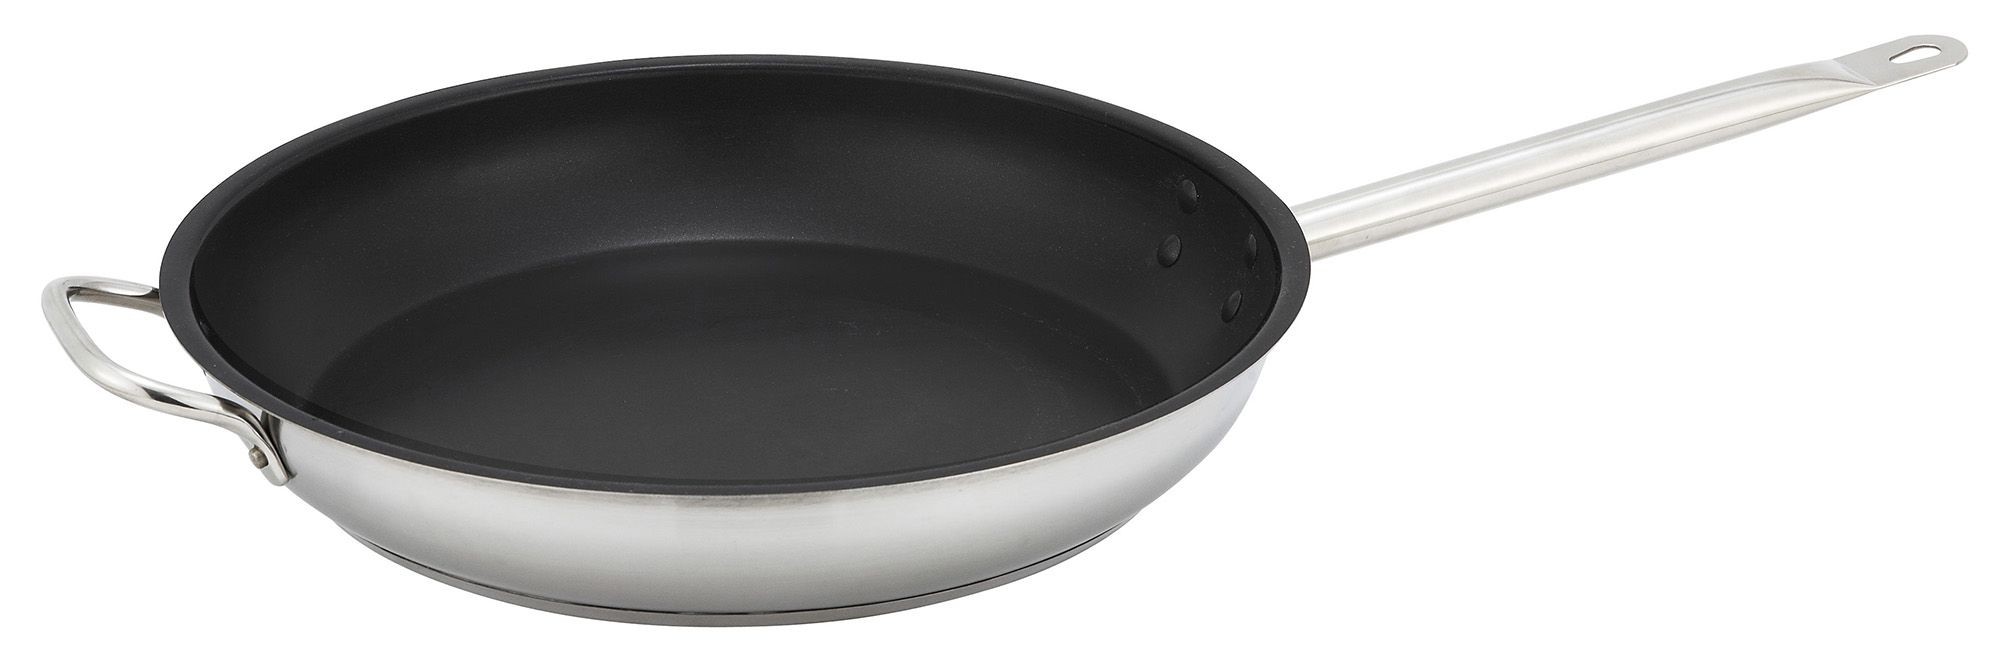 Winco SSFP-12NS Non-Stick Stainless Steel Induction Fry Pan 12"